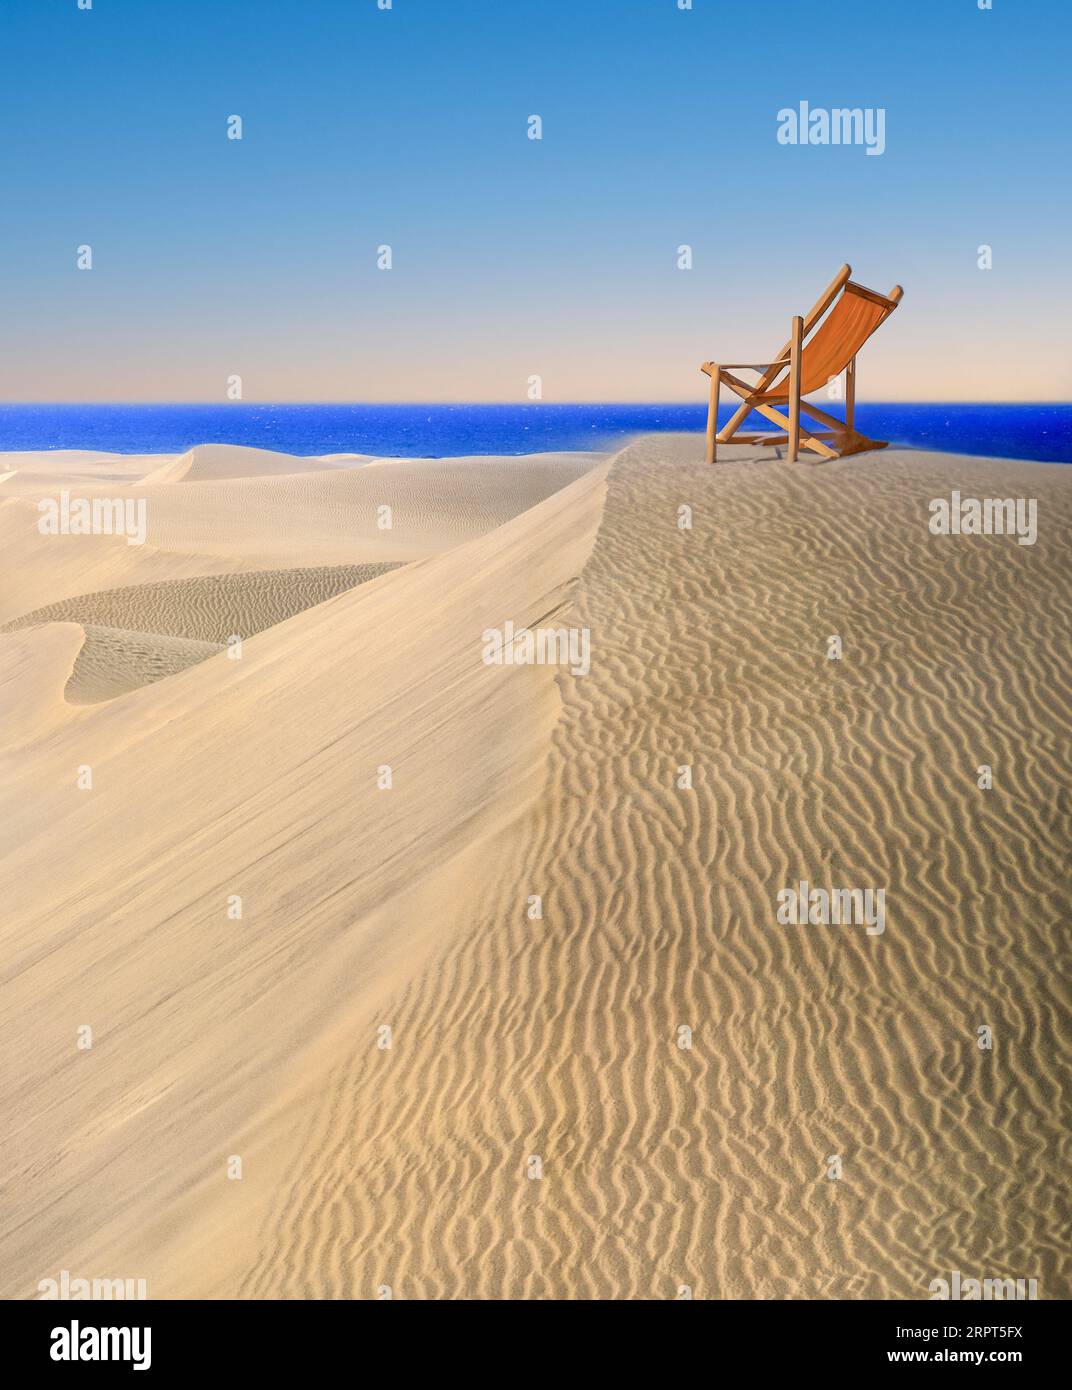 Away from it all Holiday Vacation. Sun chair on deserted sand dune facing vista view sand sea sky. Concept conceptual travel exclusive destination. Stock Photo